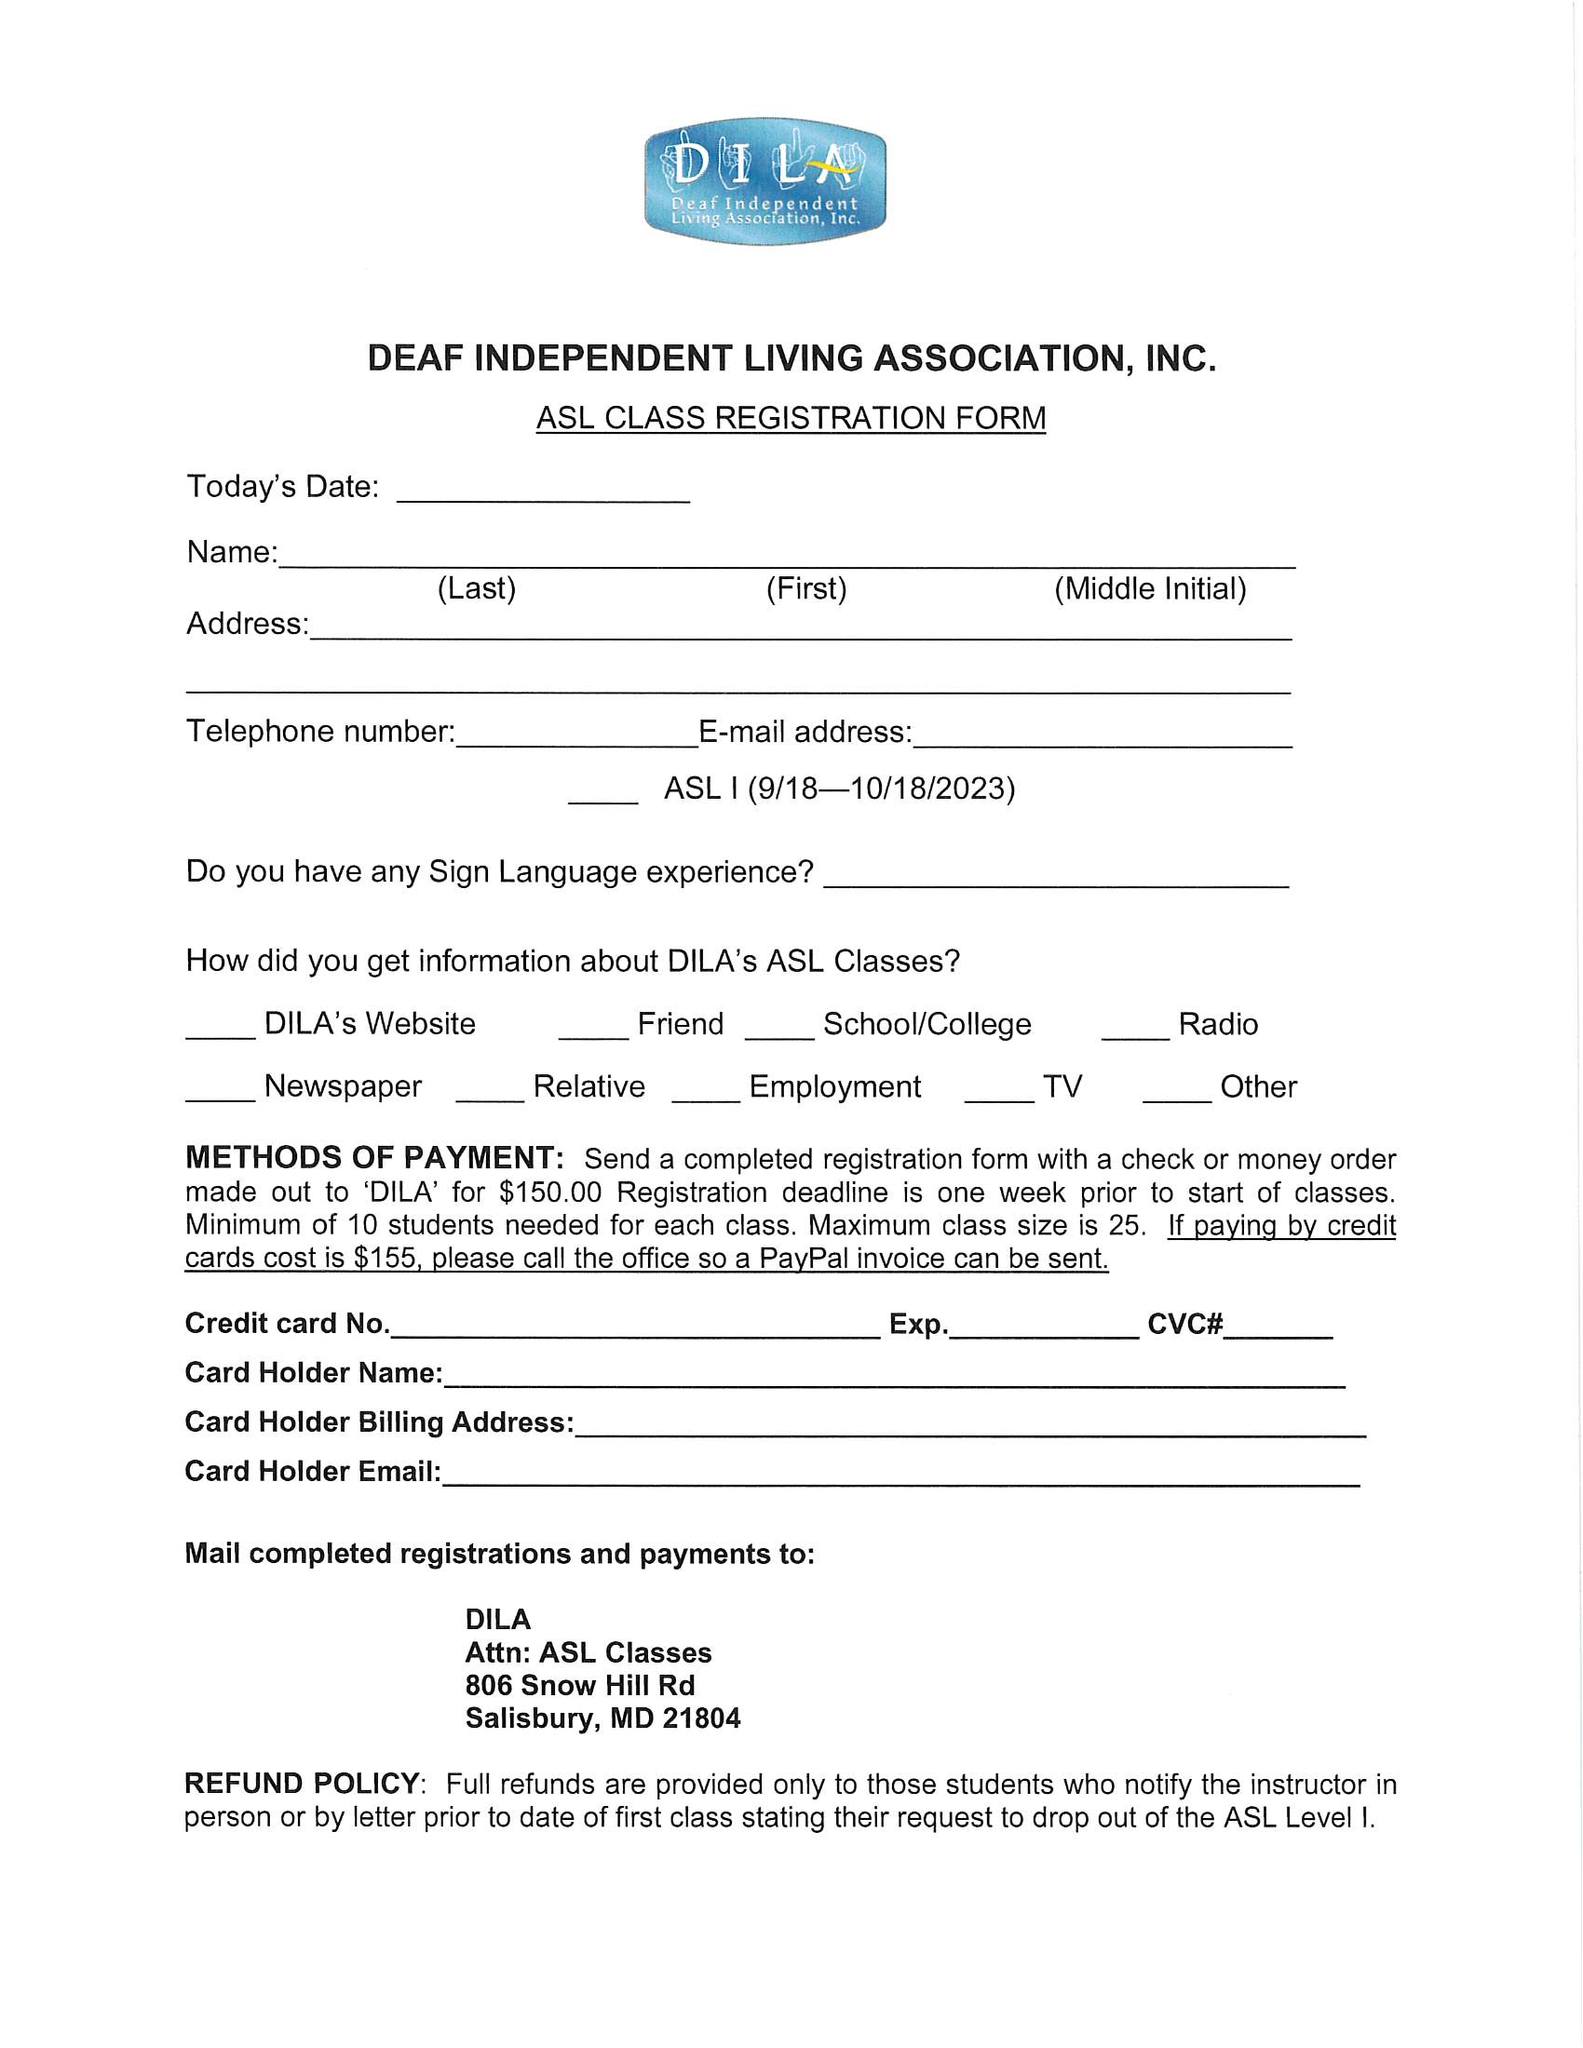 ASL Class Registration Form for DILA, Fall 2023 version. See link below for more info.